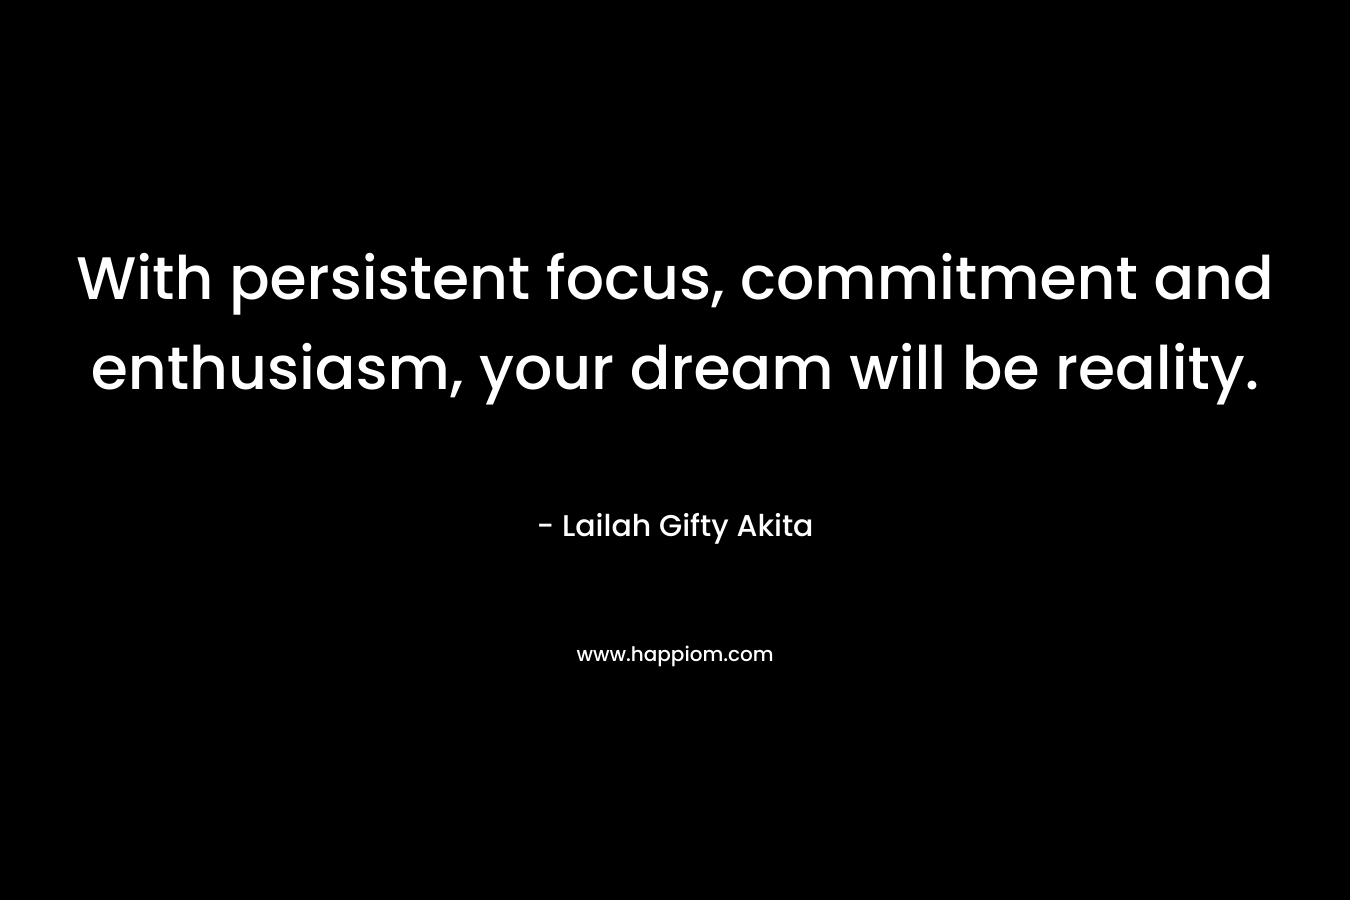 With persistent focus, commitment and enthusiasm, your dream will be reality.